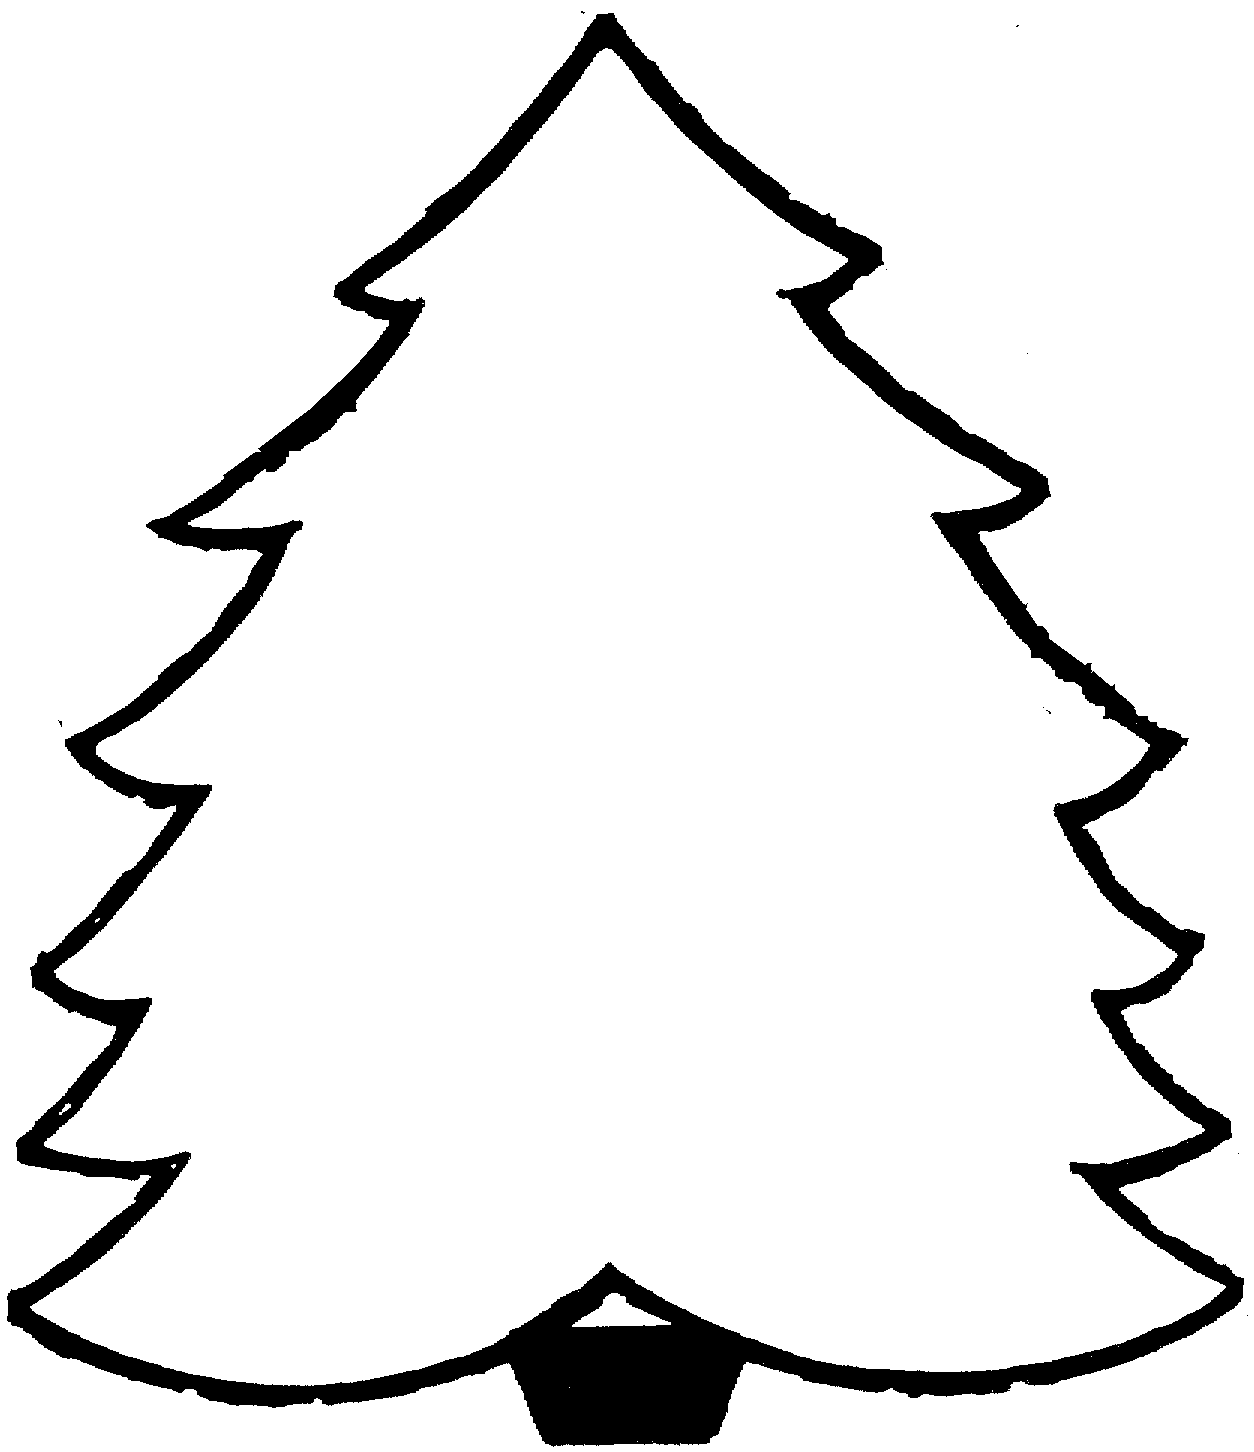 Blank Christmas tree coloring pages for kids to fill in and color.